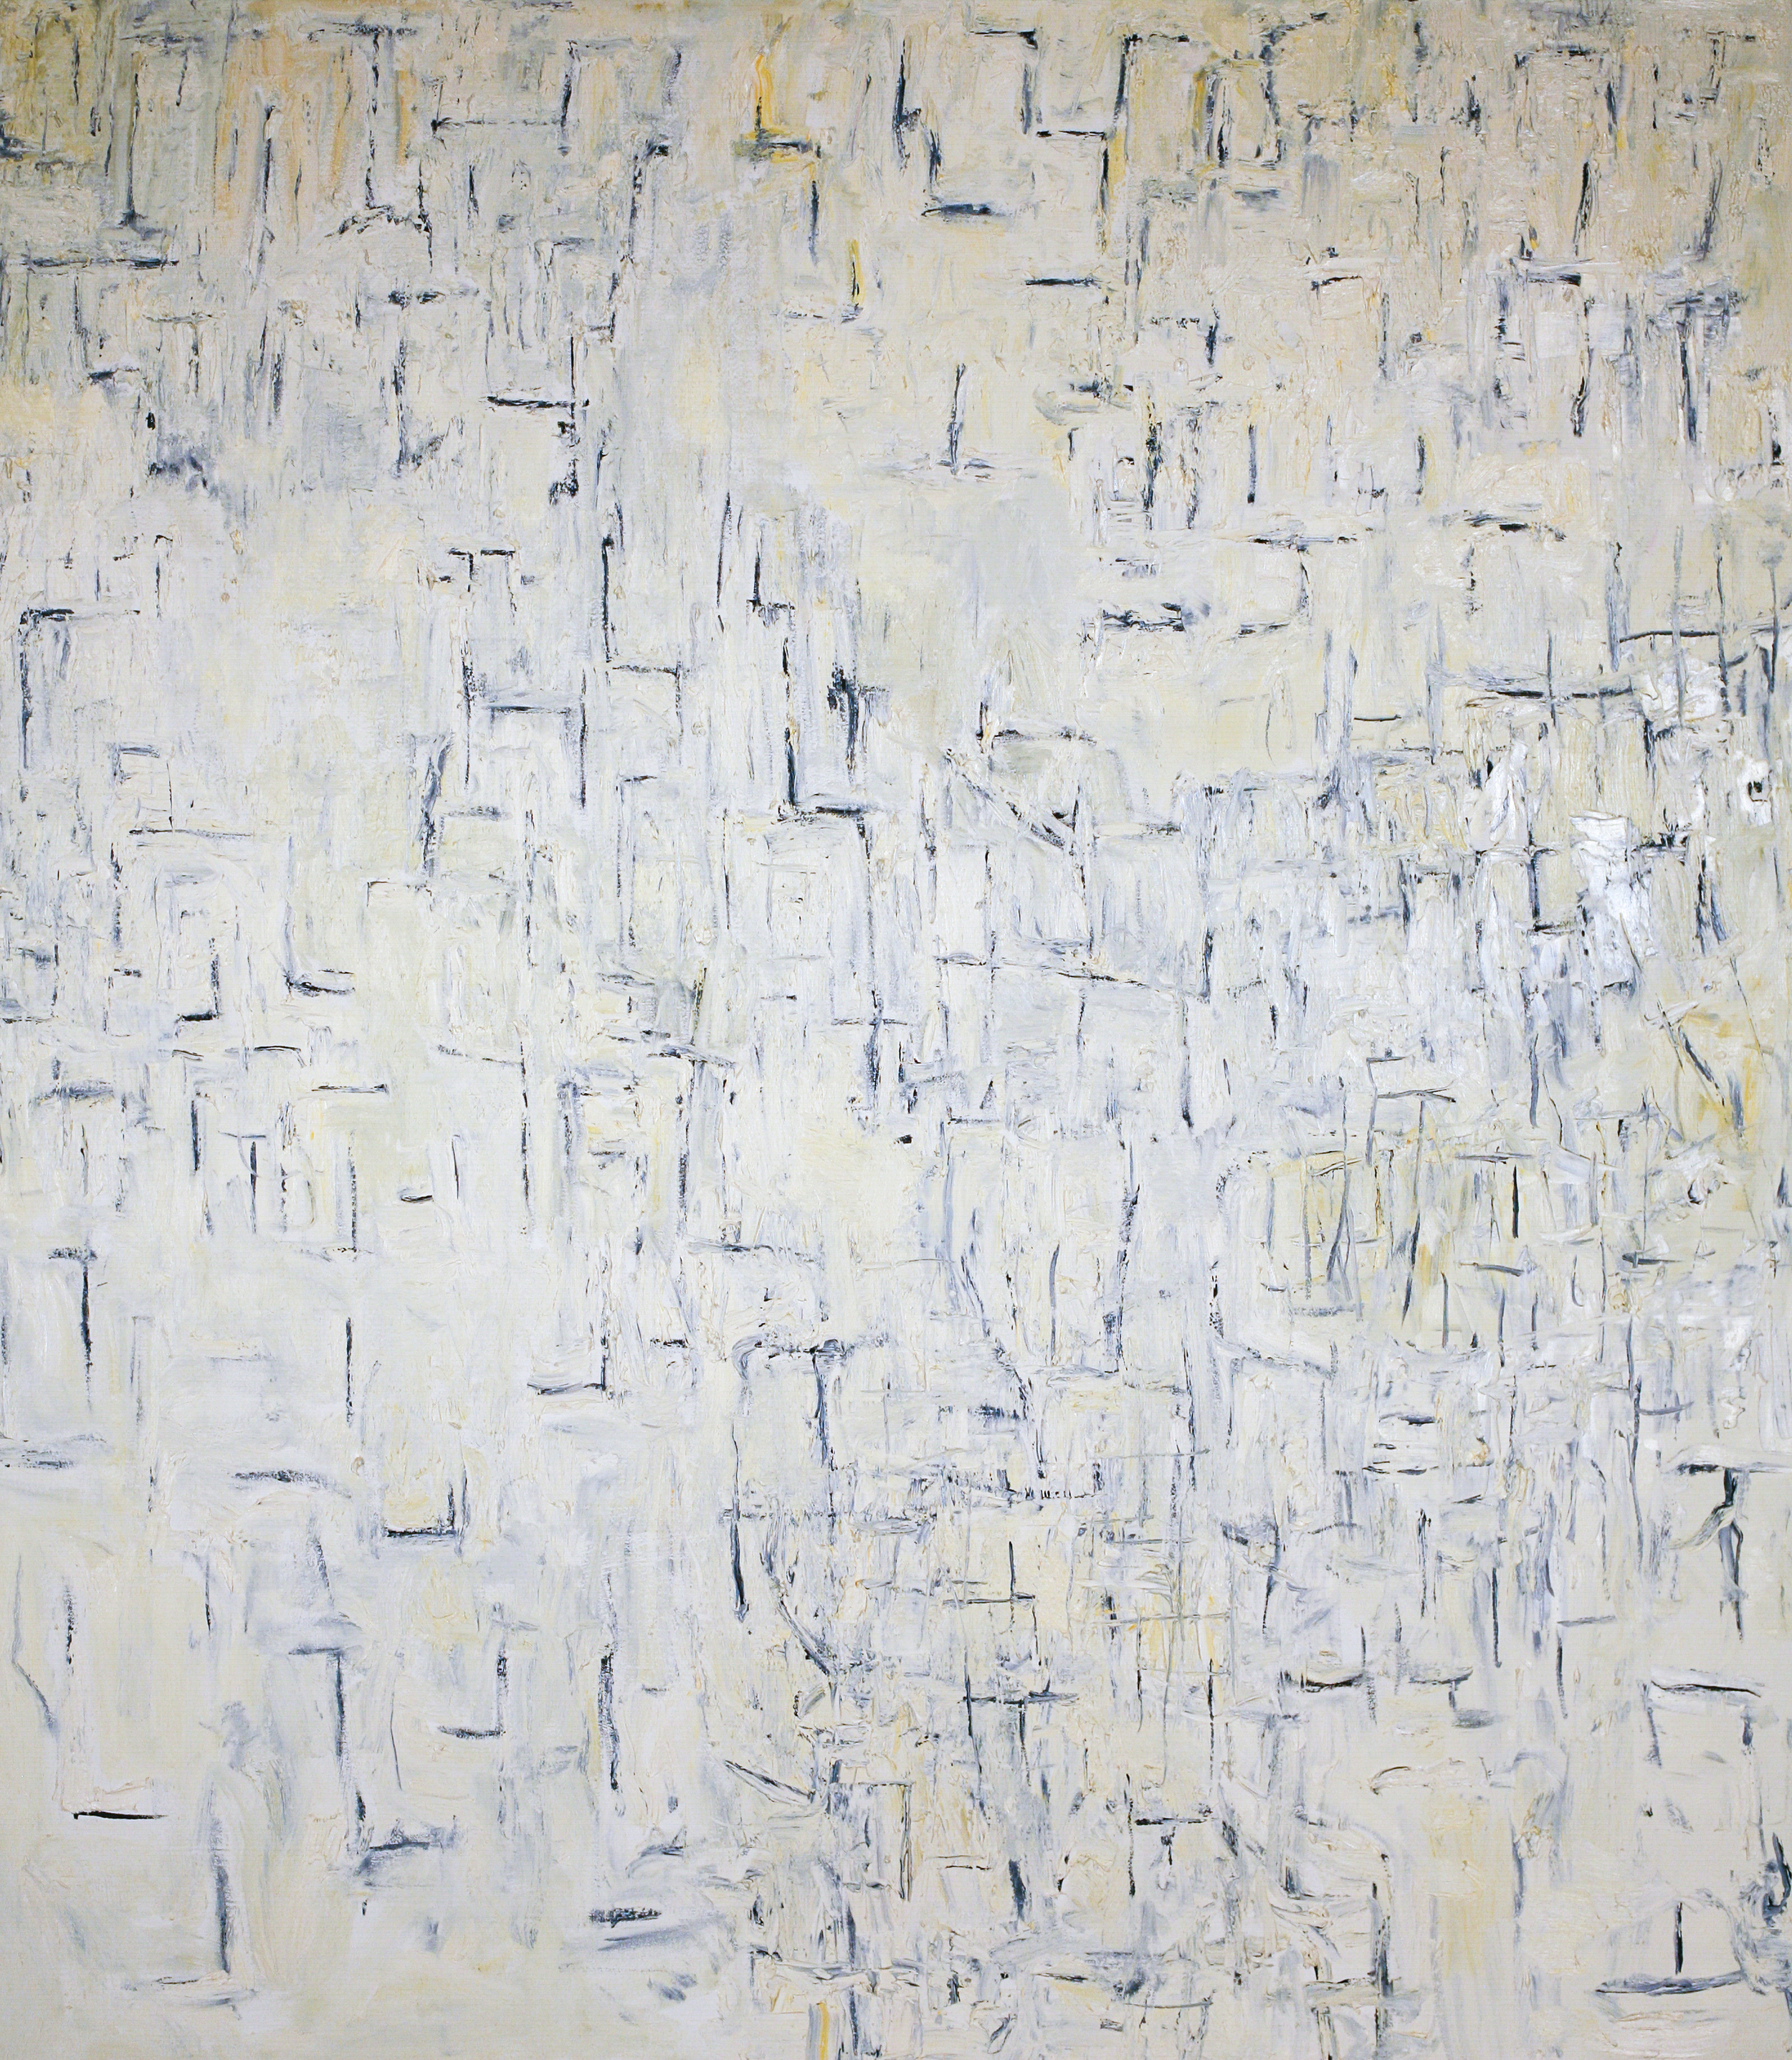 "Spring Periphery #16", oil on canvas, 80"x62"